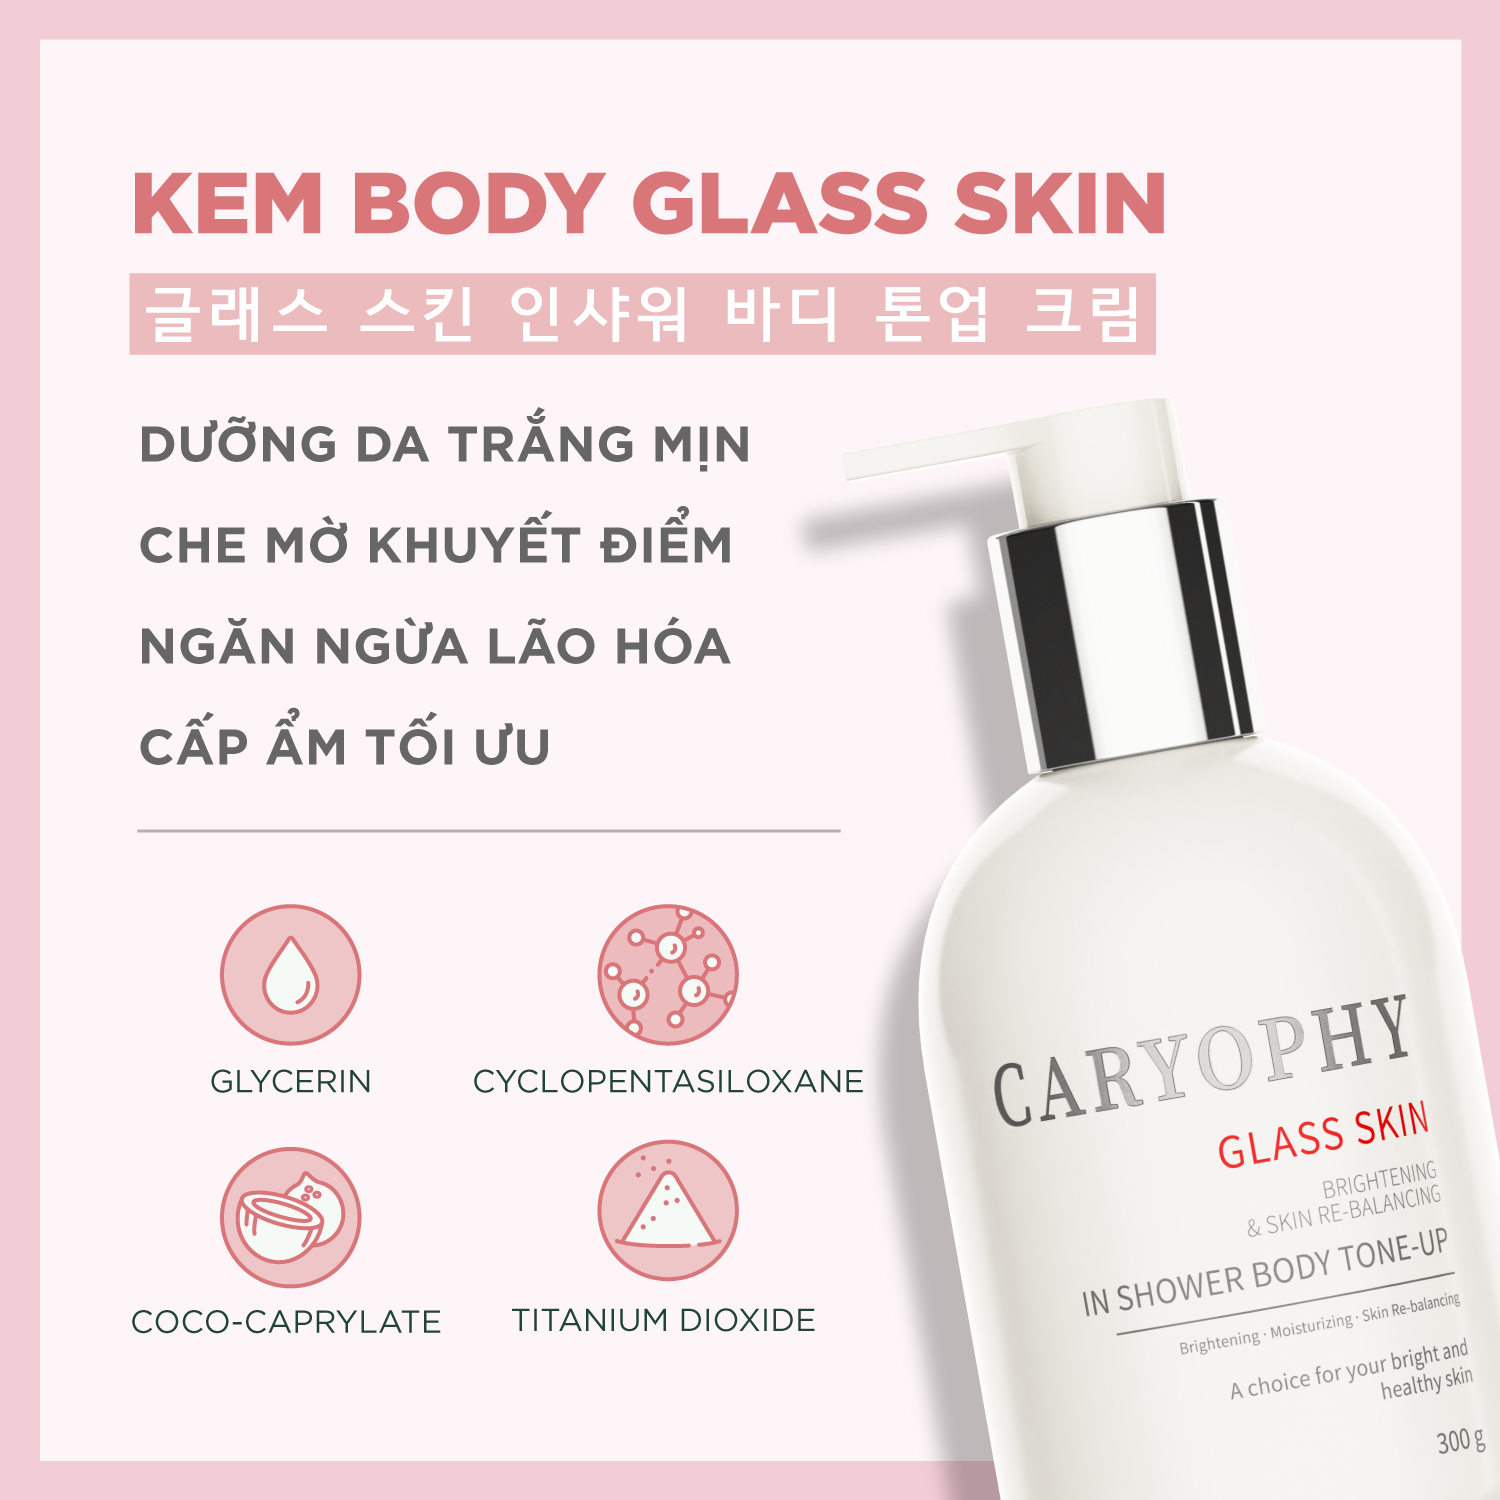 Combo 2 Minisize Body Caryophy Glass Skin 3 in 1